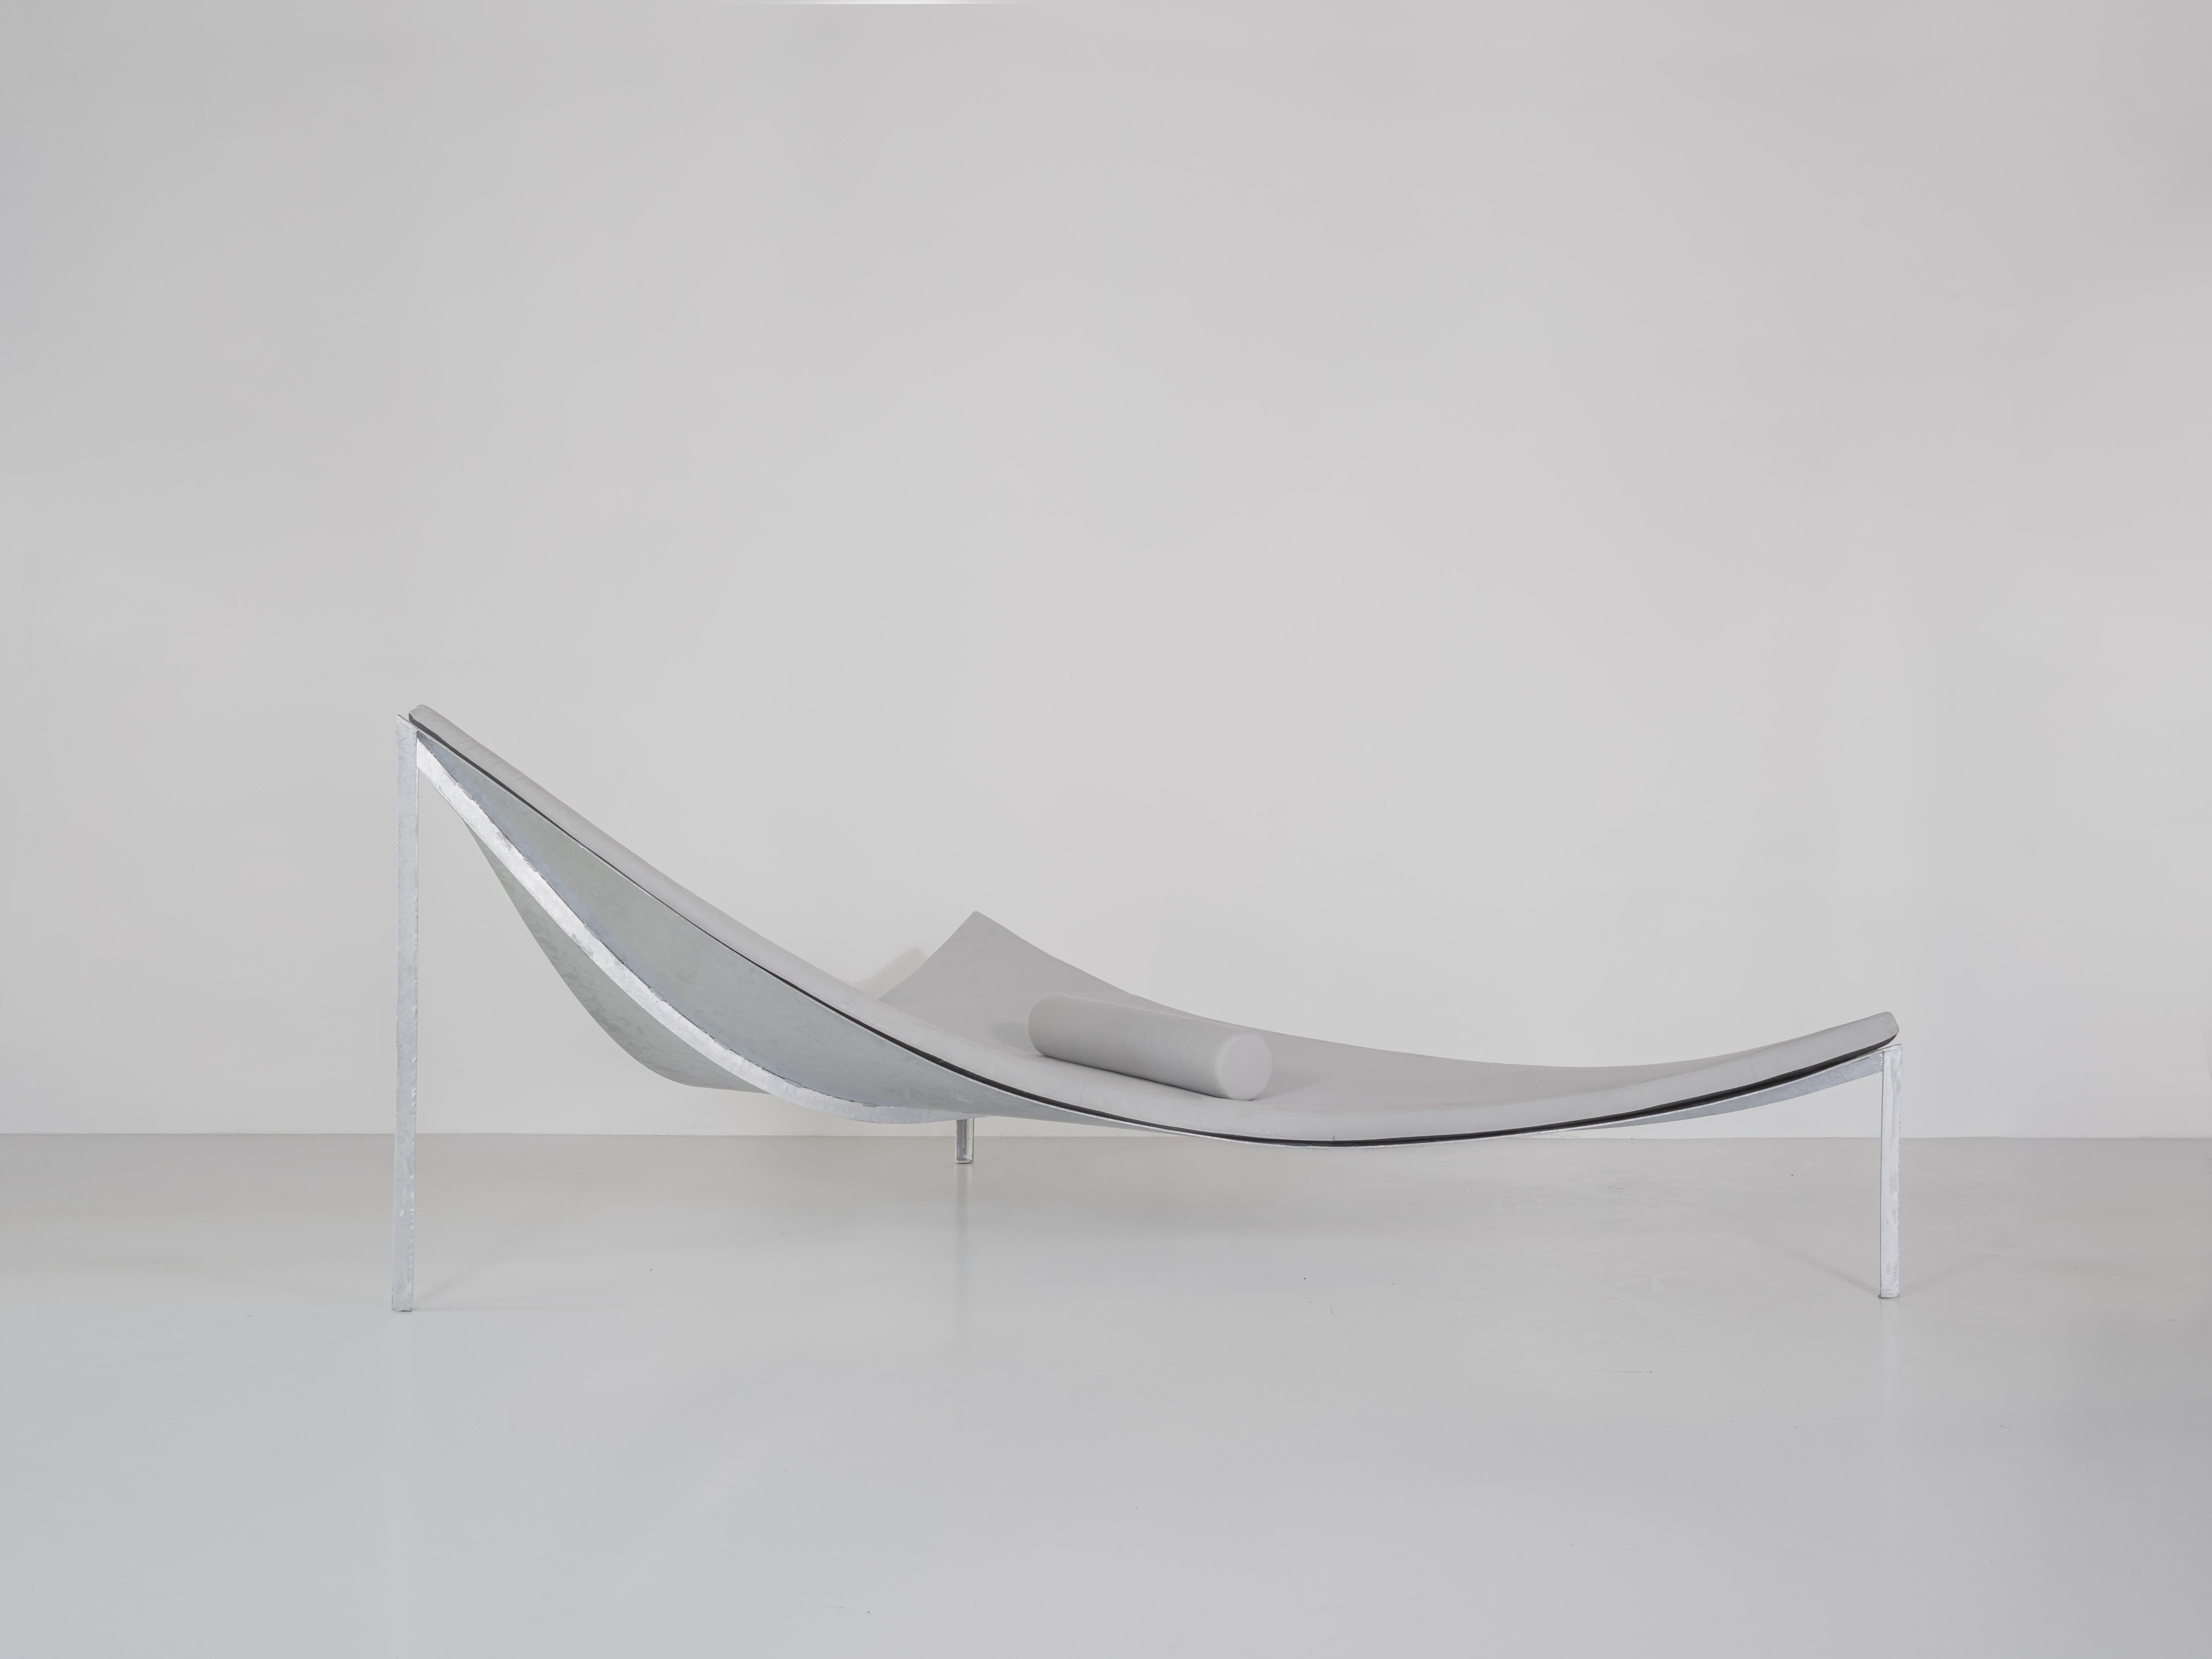 Sam Chermayeff
Triangle chaise sofa
From the series “Beasts”
Produced in exclusive for Side Gallery
Manufactured by ERTL und ZULL
Berlin, 2021
Galvanized steel, upholstery
Contemporary Design 

Measurements
314,3 cm x 208,4 cm x 120h